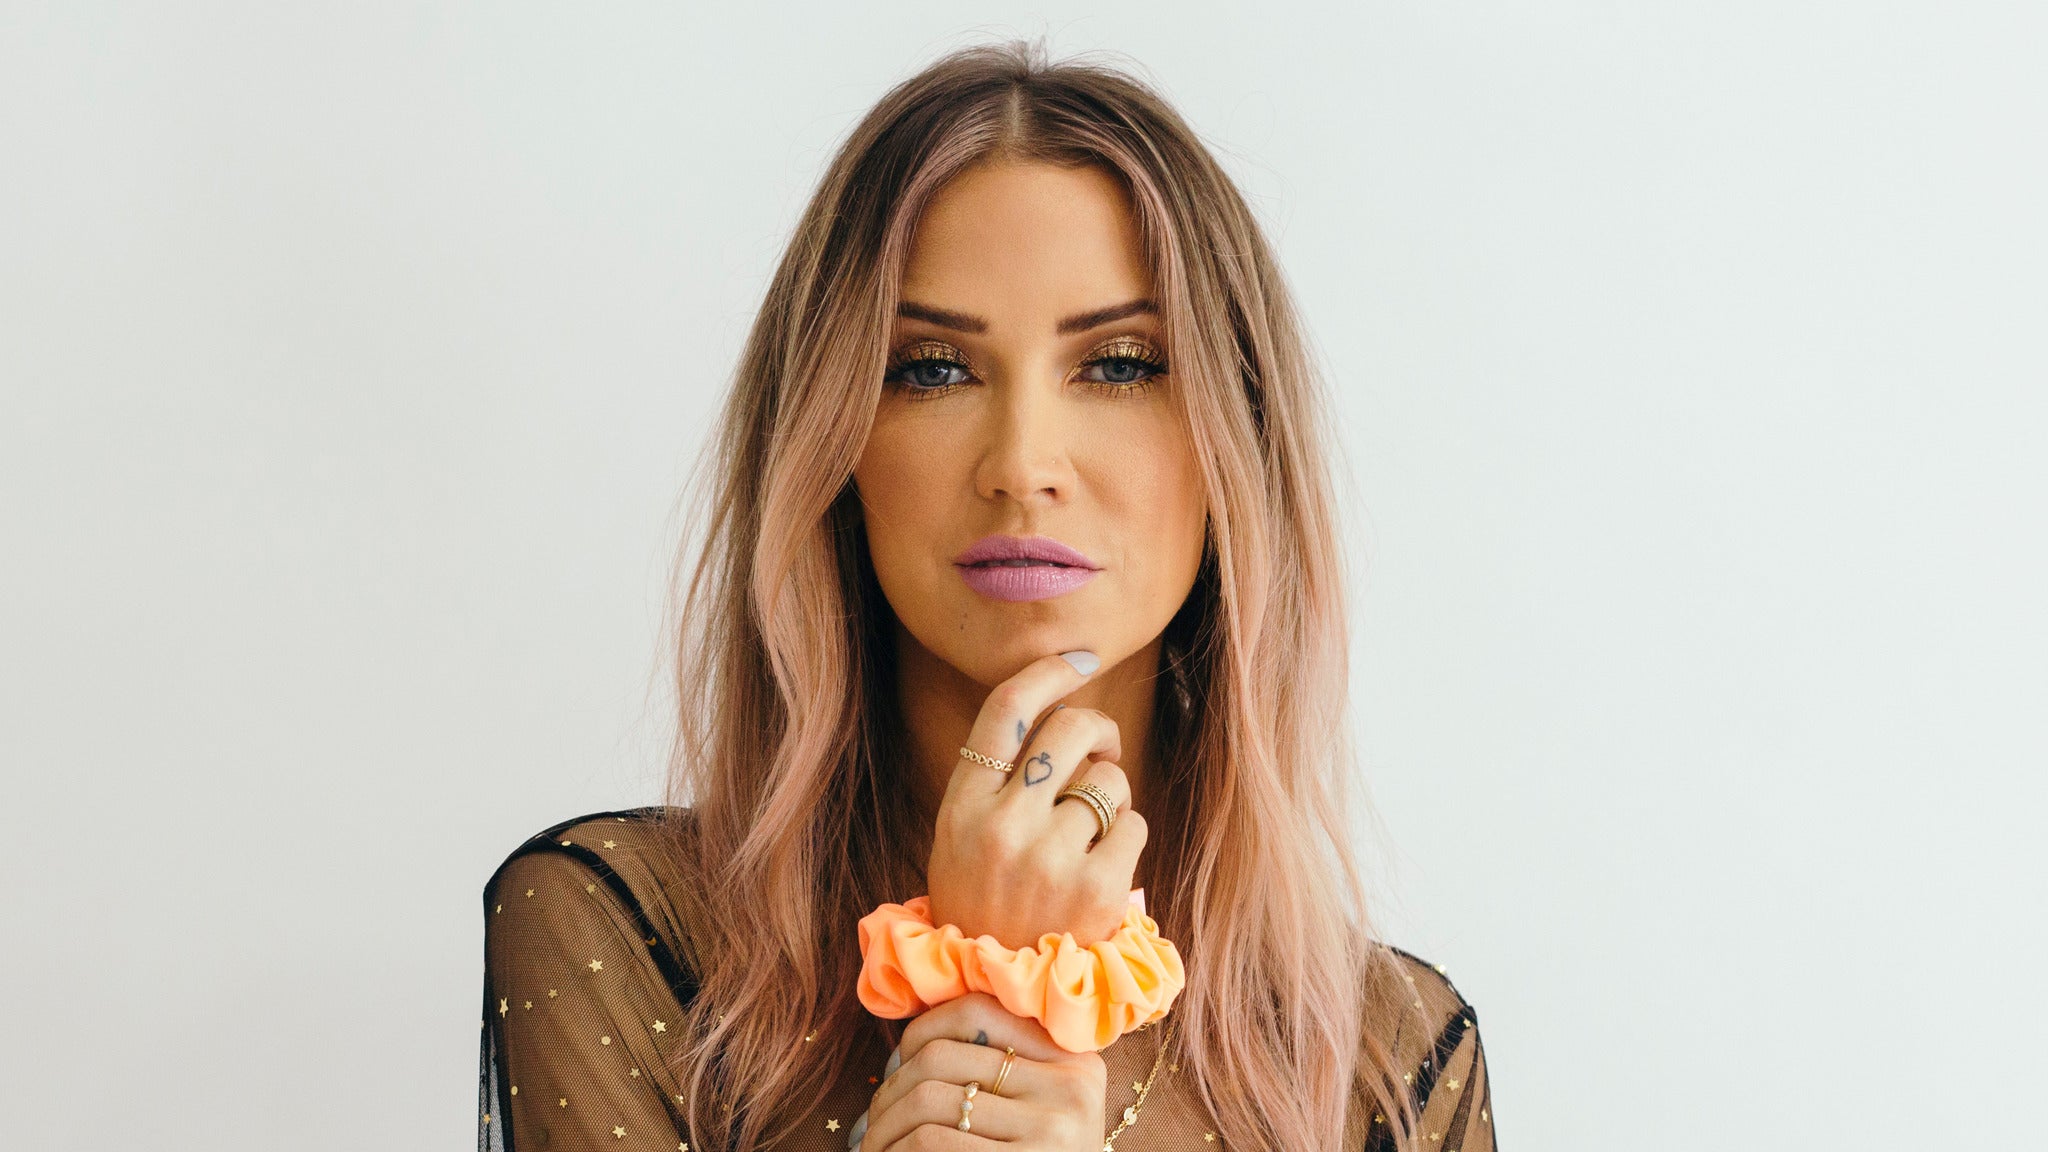 Kaitlyn Bristowe: KB Fall Crawl Tour in Vancouver promo photo for Live Nation Mobile App presale offer code